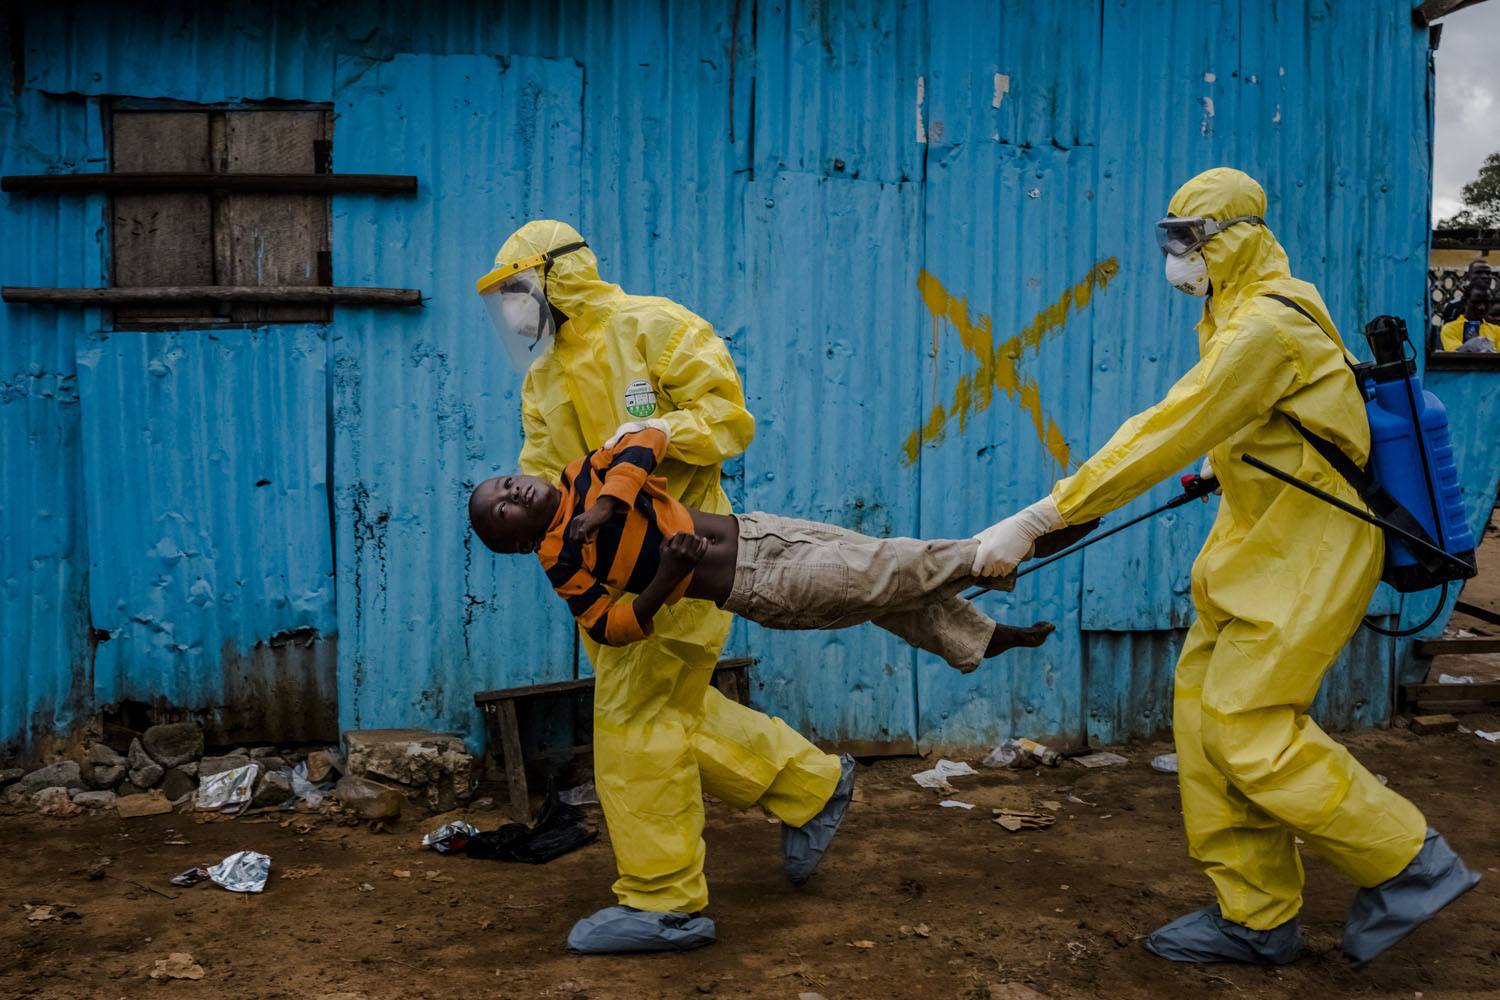 Sept. 8, 2014. Medical staff carry James Dorbor, 8, suspected of having Ebola, into a treatment facility in Monrovia, Liberia.  The reality and hysteria over Ebola is having a serious economic impact on Guinea, Liberia and Sierra Leone, three nations already at the bottom of global economic and social indicators.